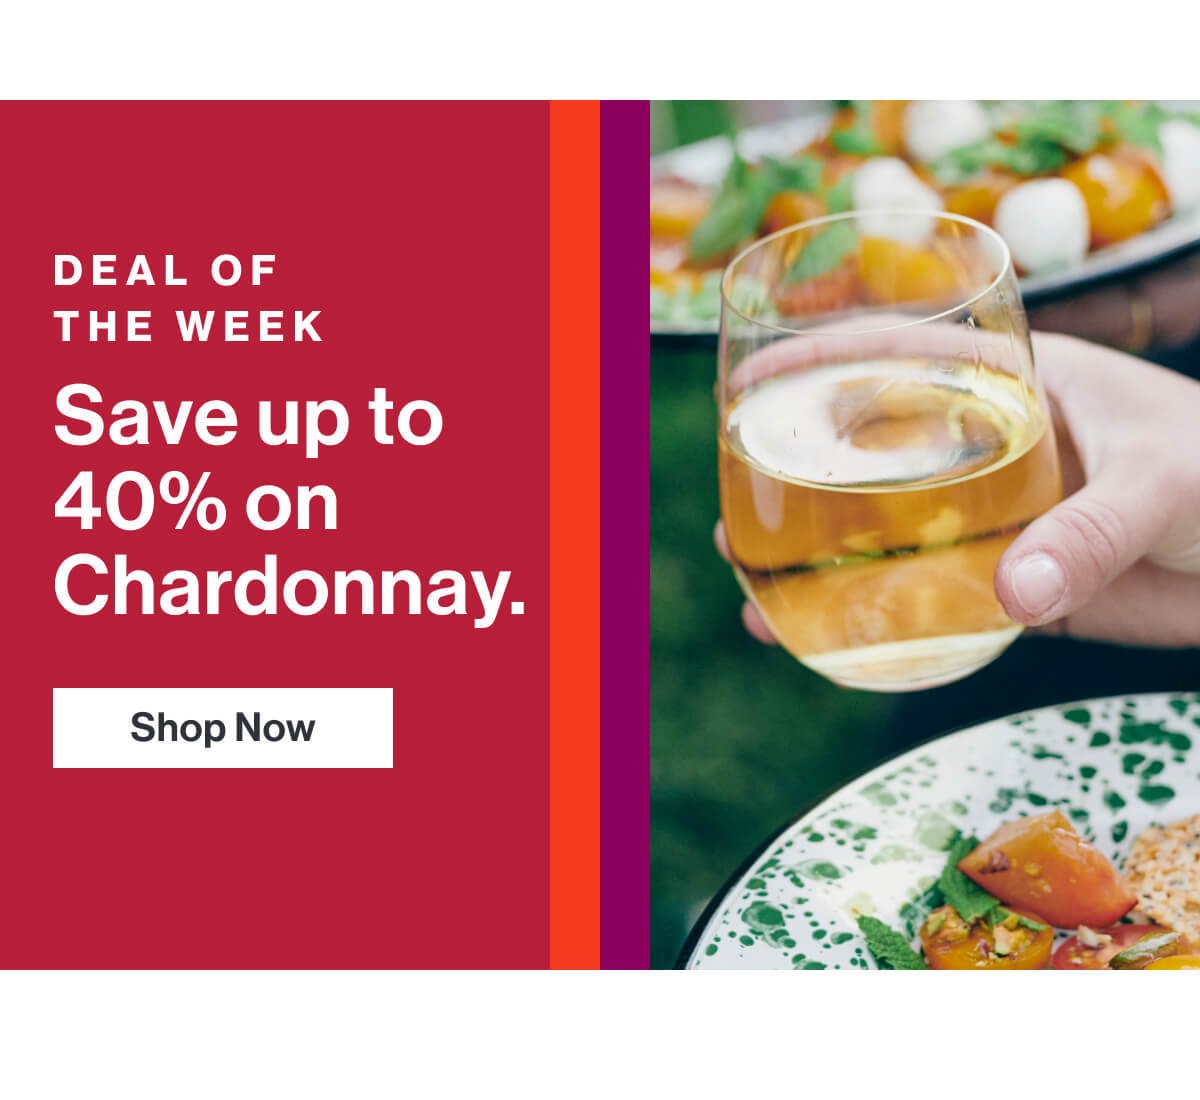 Deal of the Week - up to 40% off Chardonnay